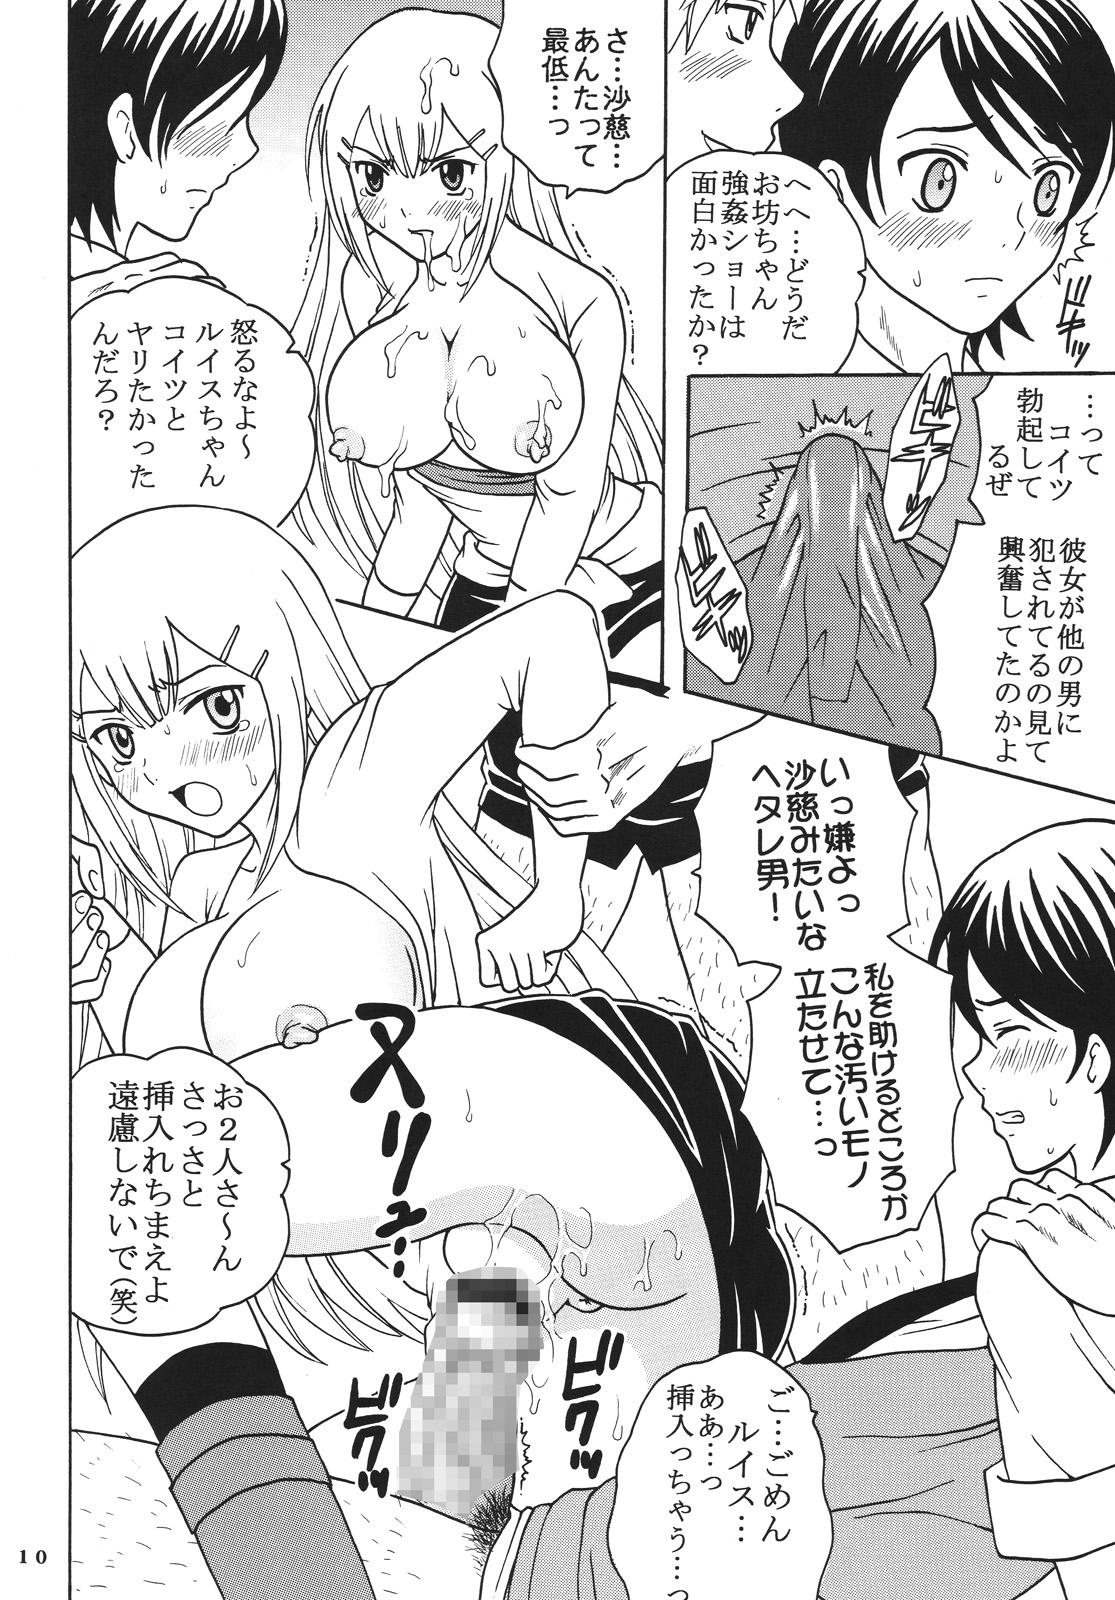 Blondes COSMIC BREED 00 - Gundam 00 Chica - Page 11